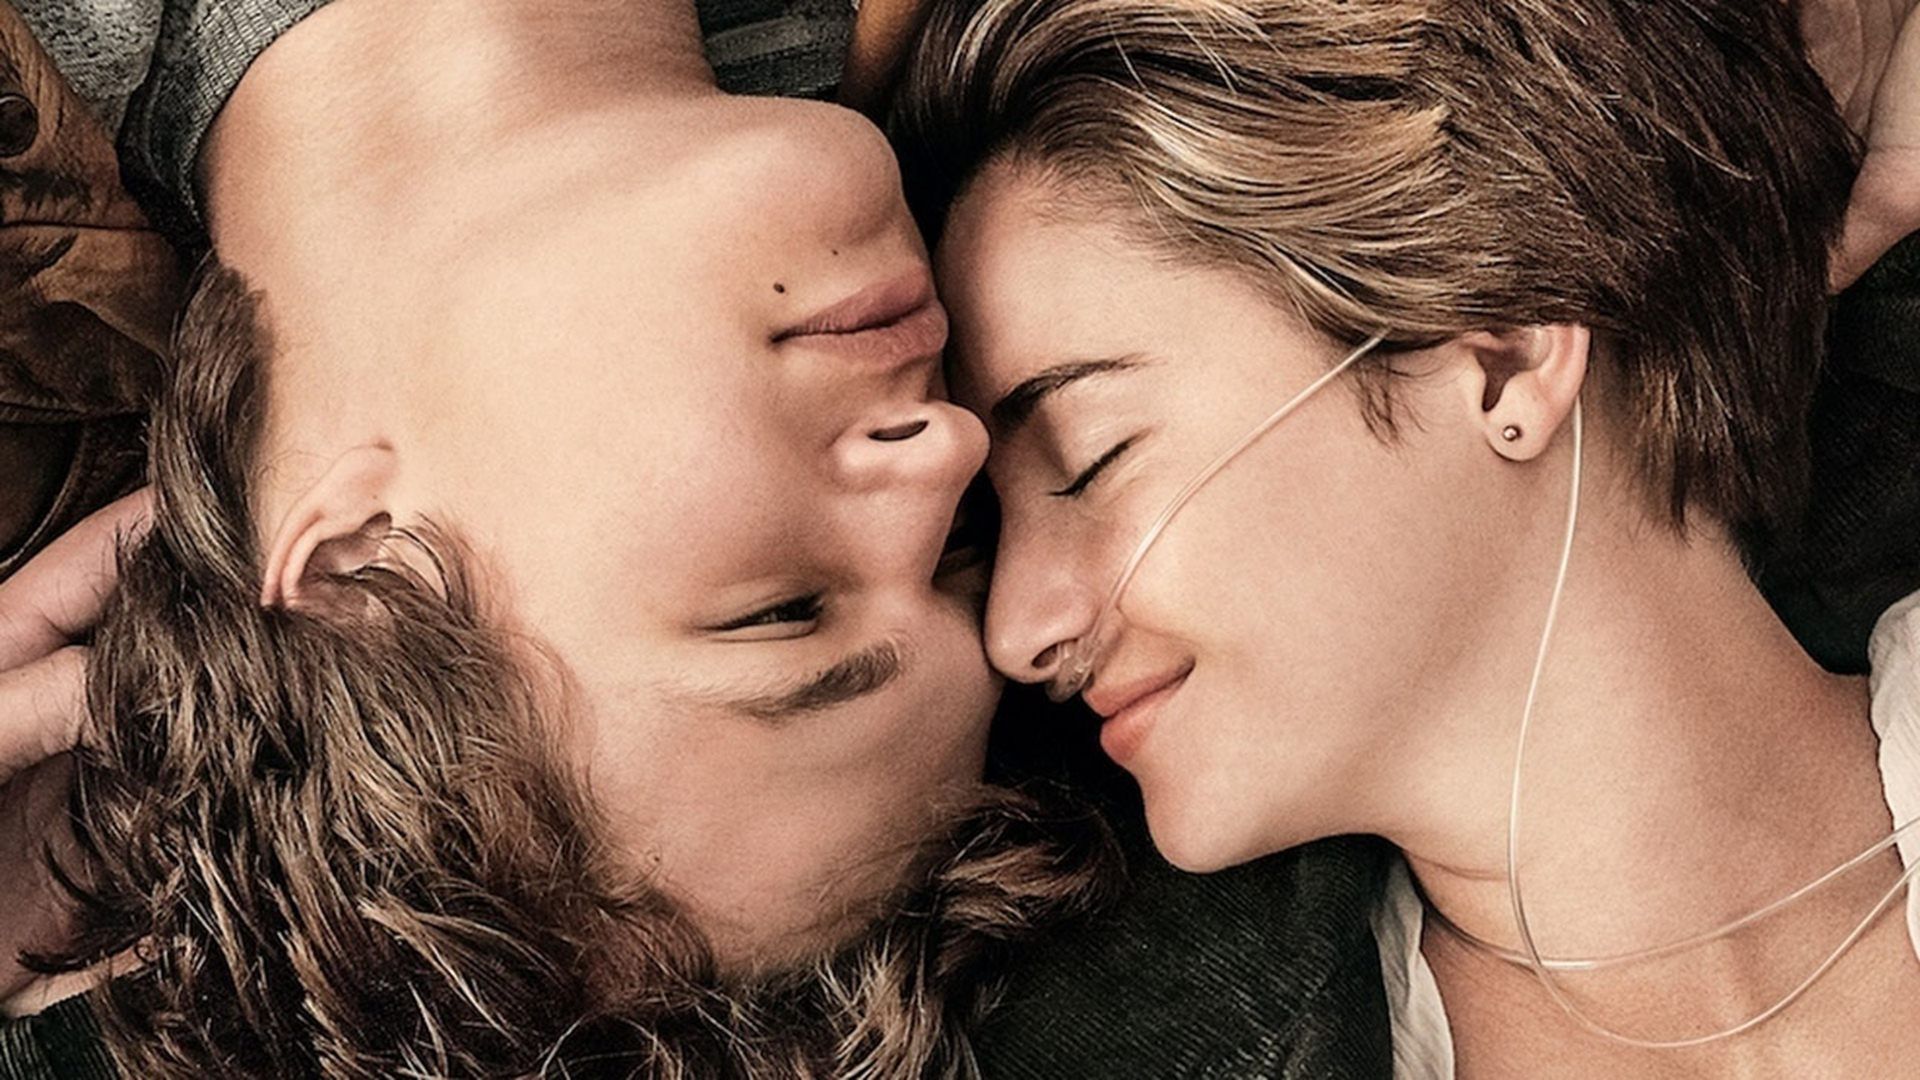 hazel and augustus the fault in our stars 1920 1080 14d7c900a8b1c2a28b2cf0997b d